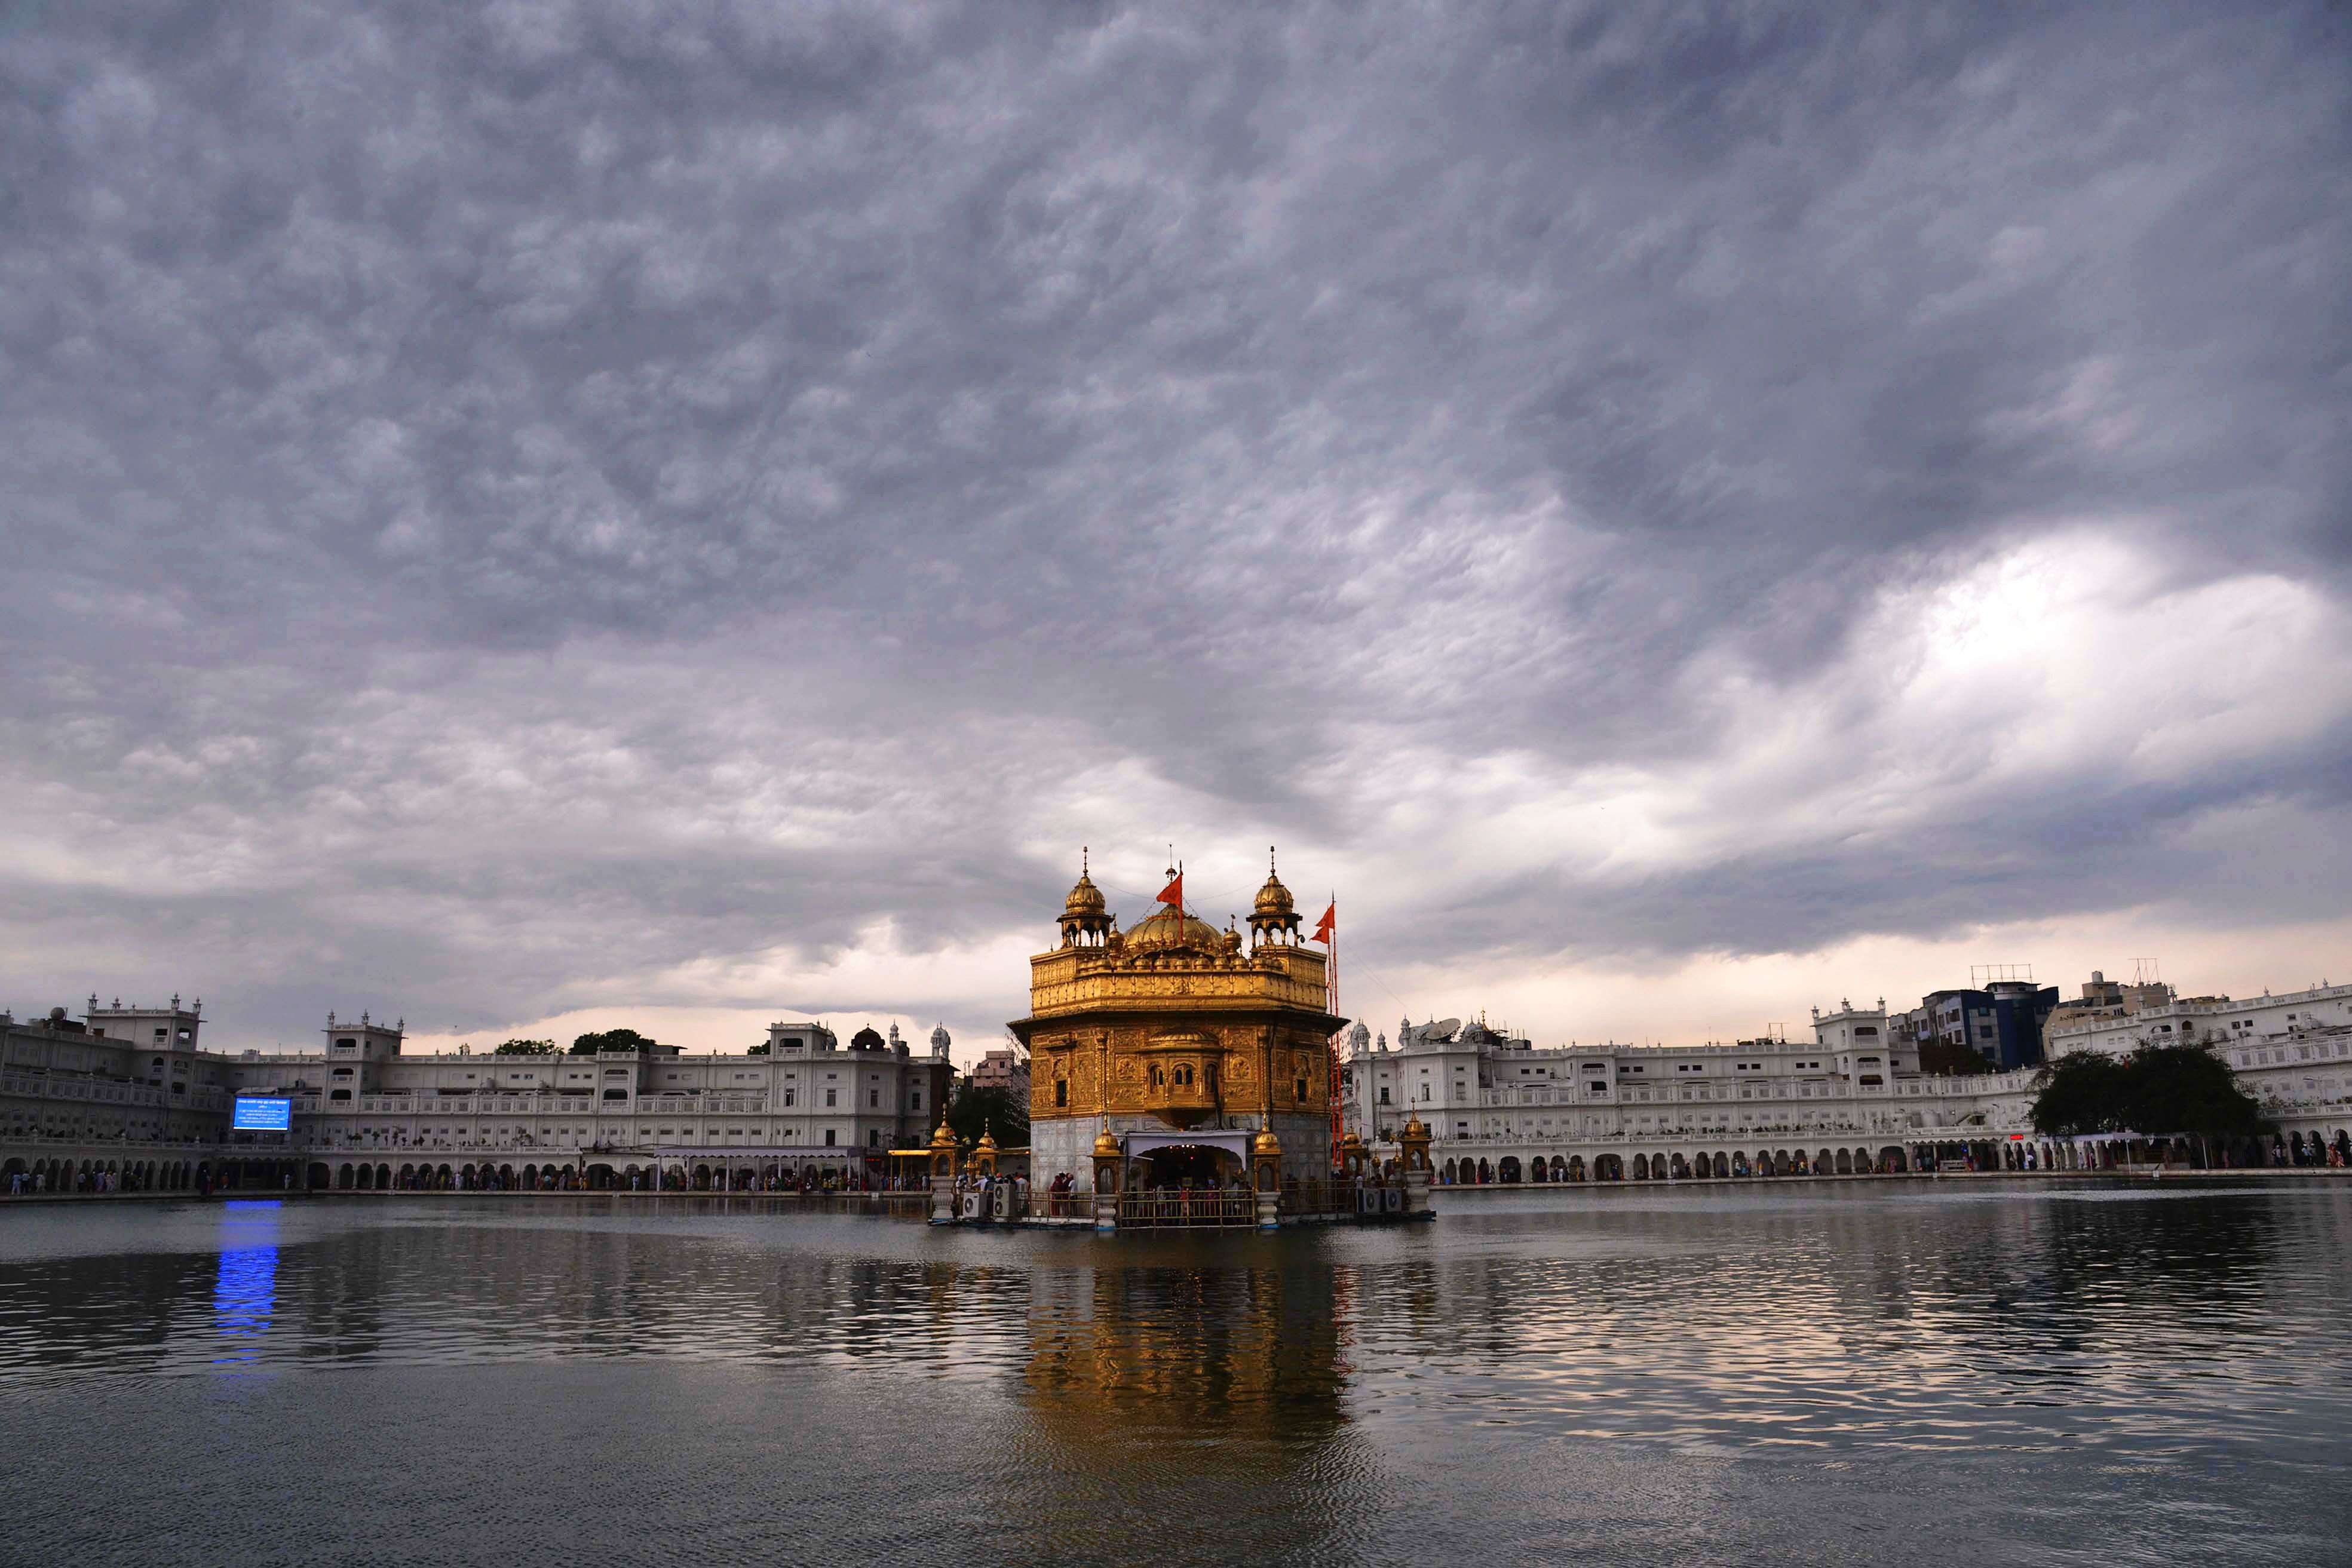 Dark clouds loom over the holiest Sikh shrine, the Golden temple in Amritsar. (AFP PHOTO/NARINDER NANU)